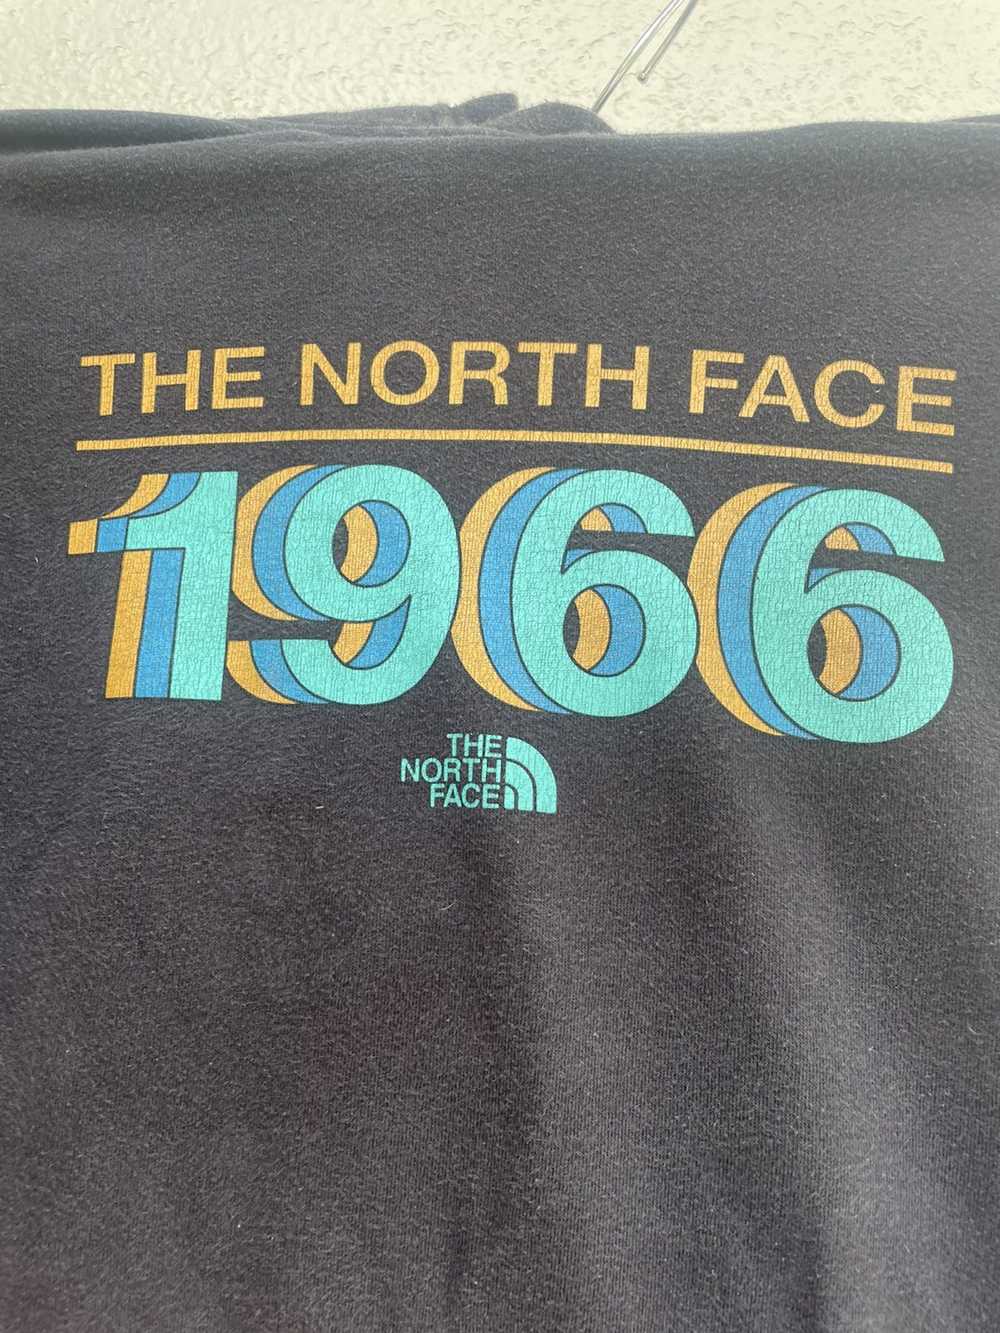 The North Face the north face 1966 - image 2